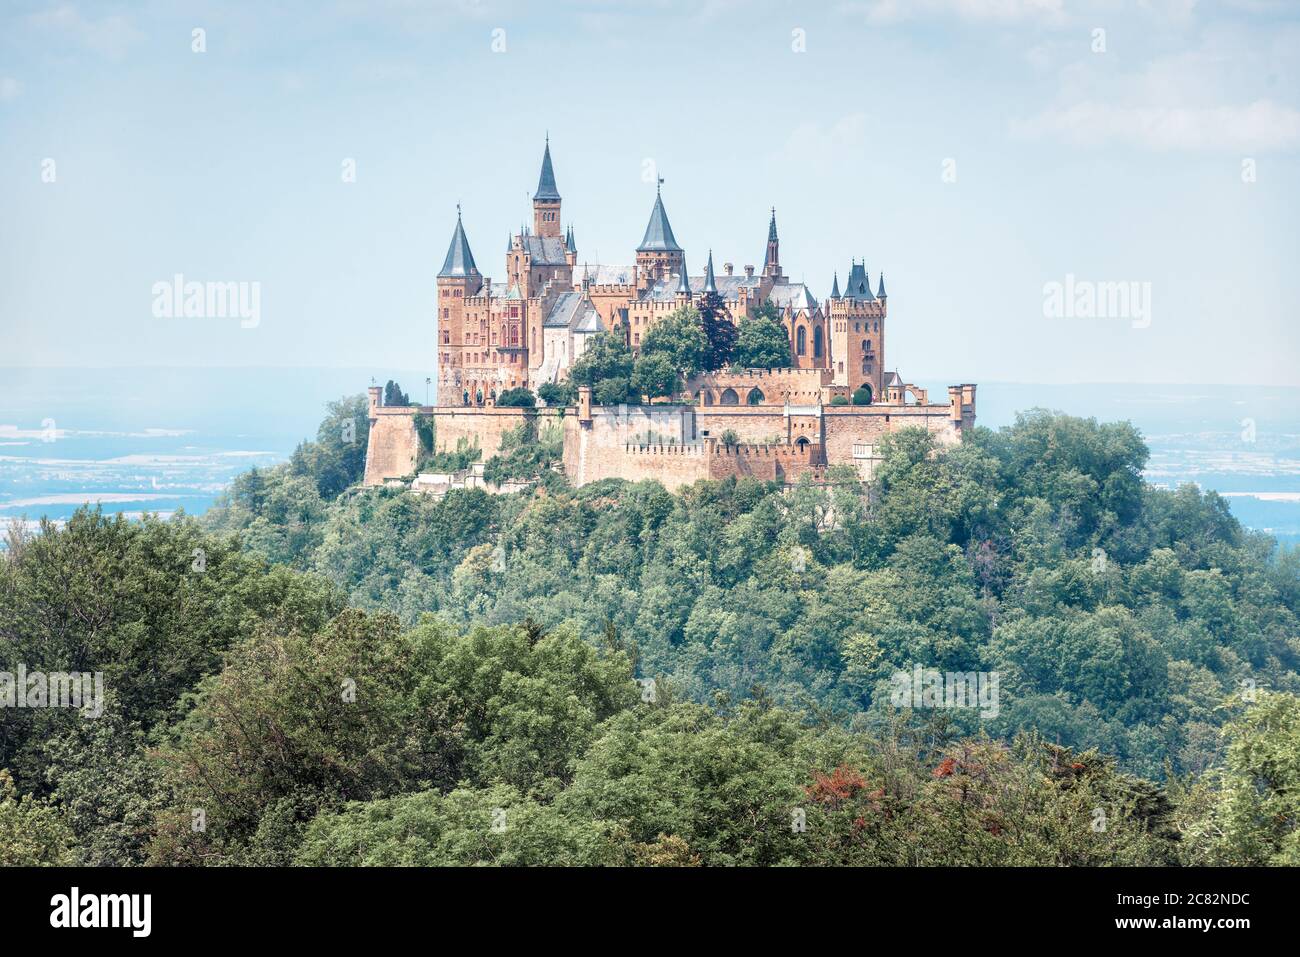 Hohenzollern Castle in summer morning, Germany. It is famous landmark in Stuttgart vicinity. Landscape with fairytale Gothic castle like palace. Sceni Stock Photo